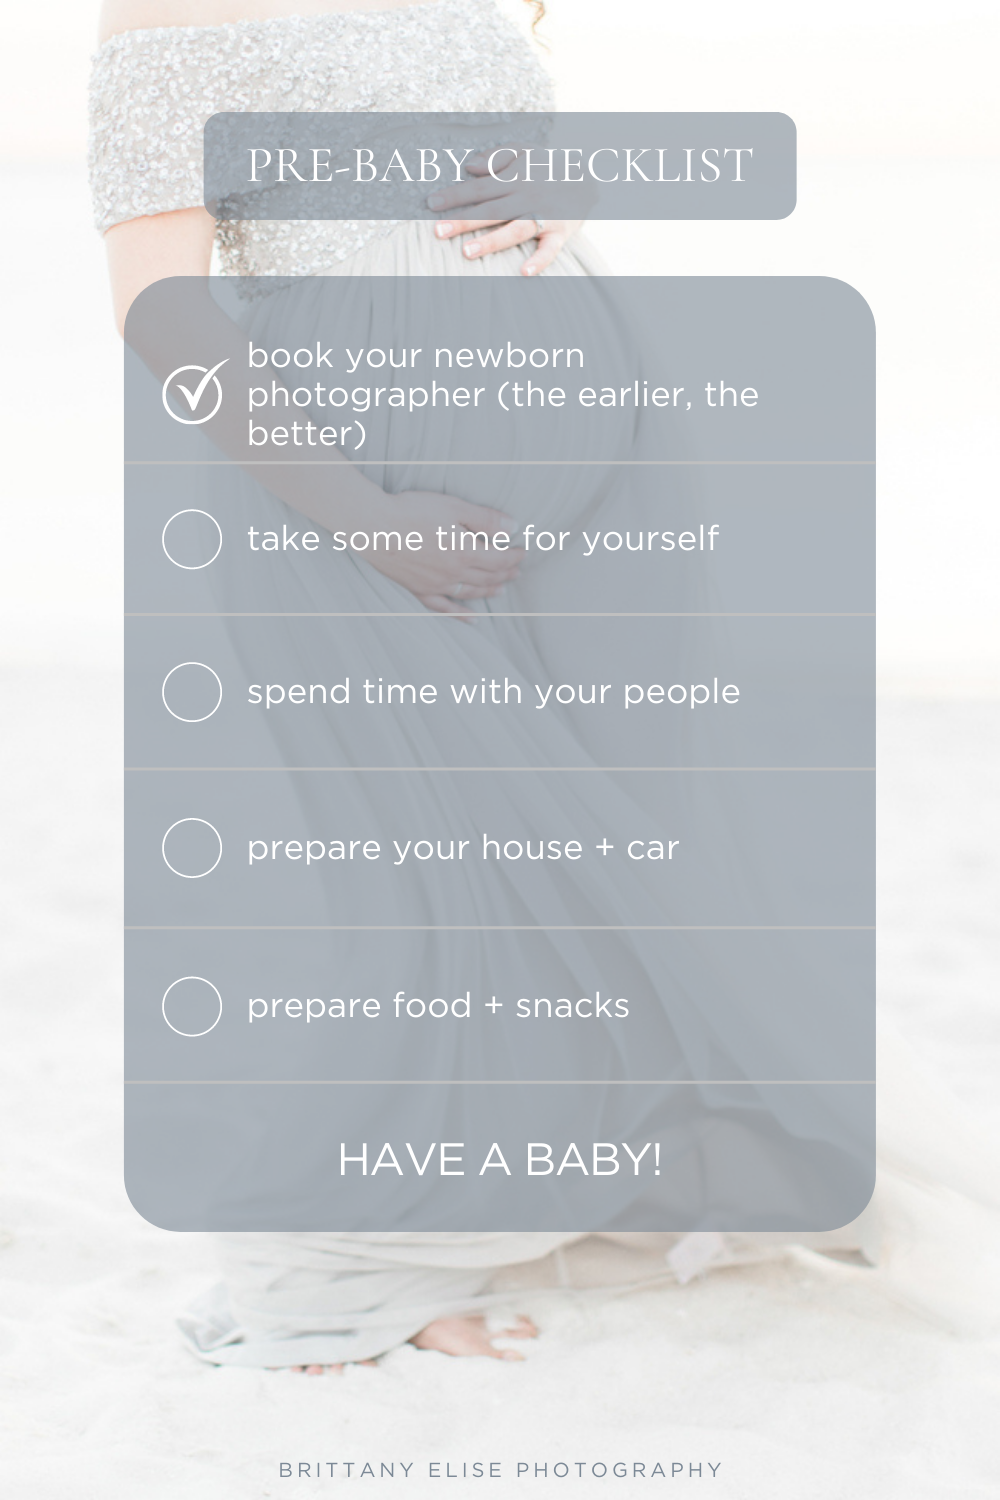 Pre-baby checklist for the things you may not think about but have a big impact. Written by Brittany Elise Photography.